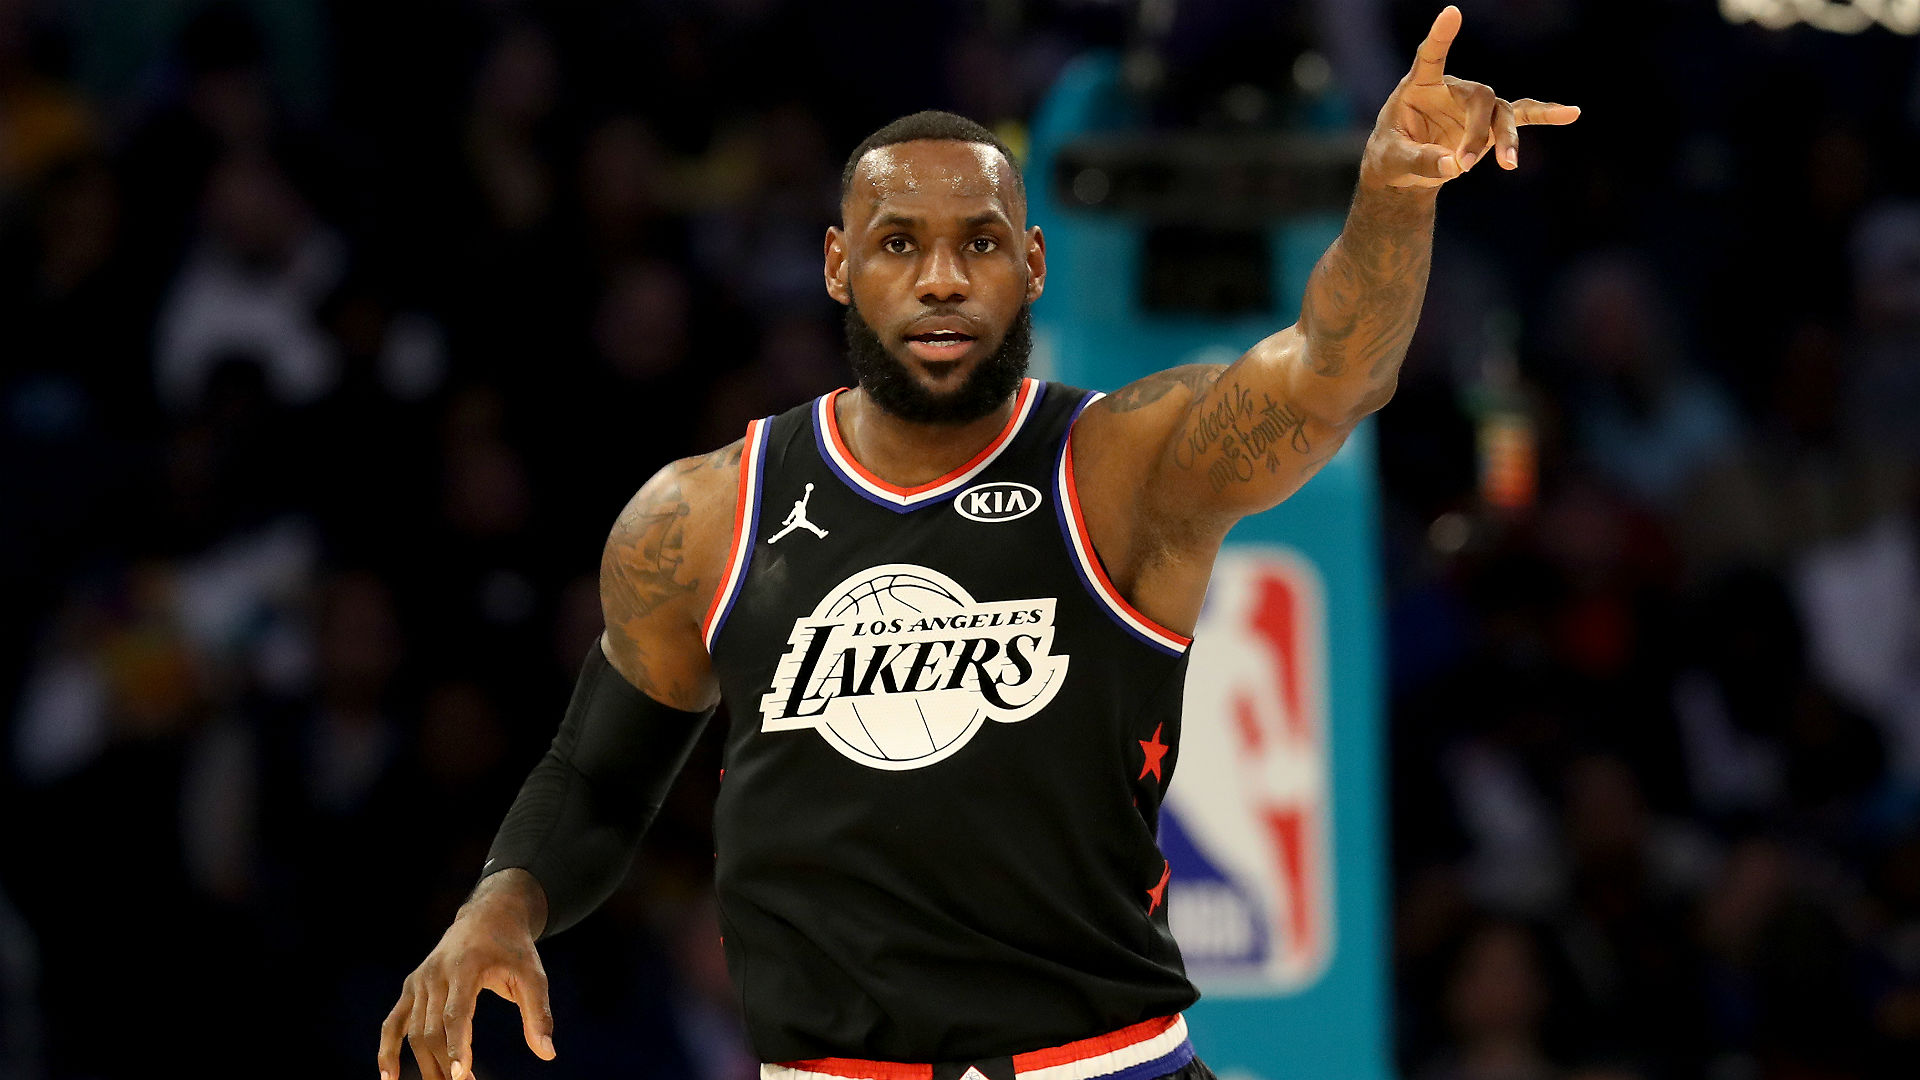 NBA All-Star 2019: 7 crazy stats from 